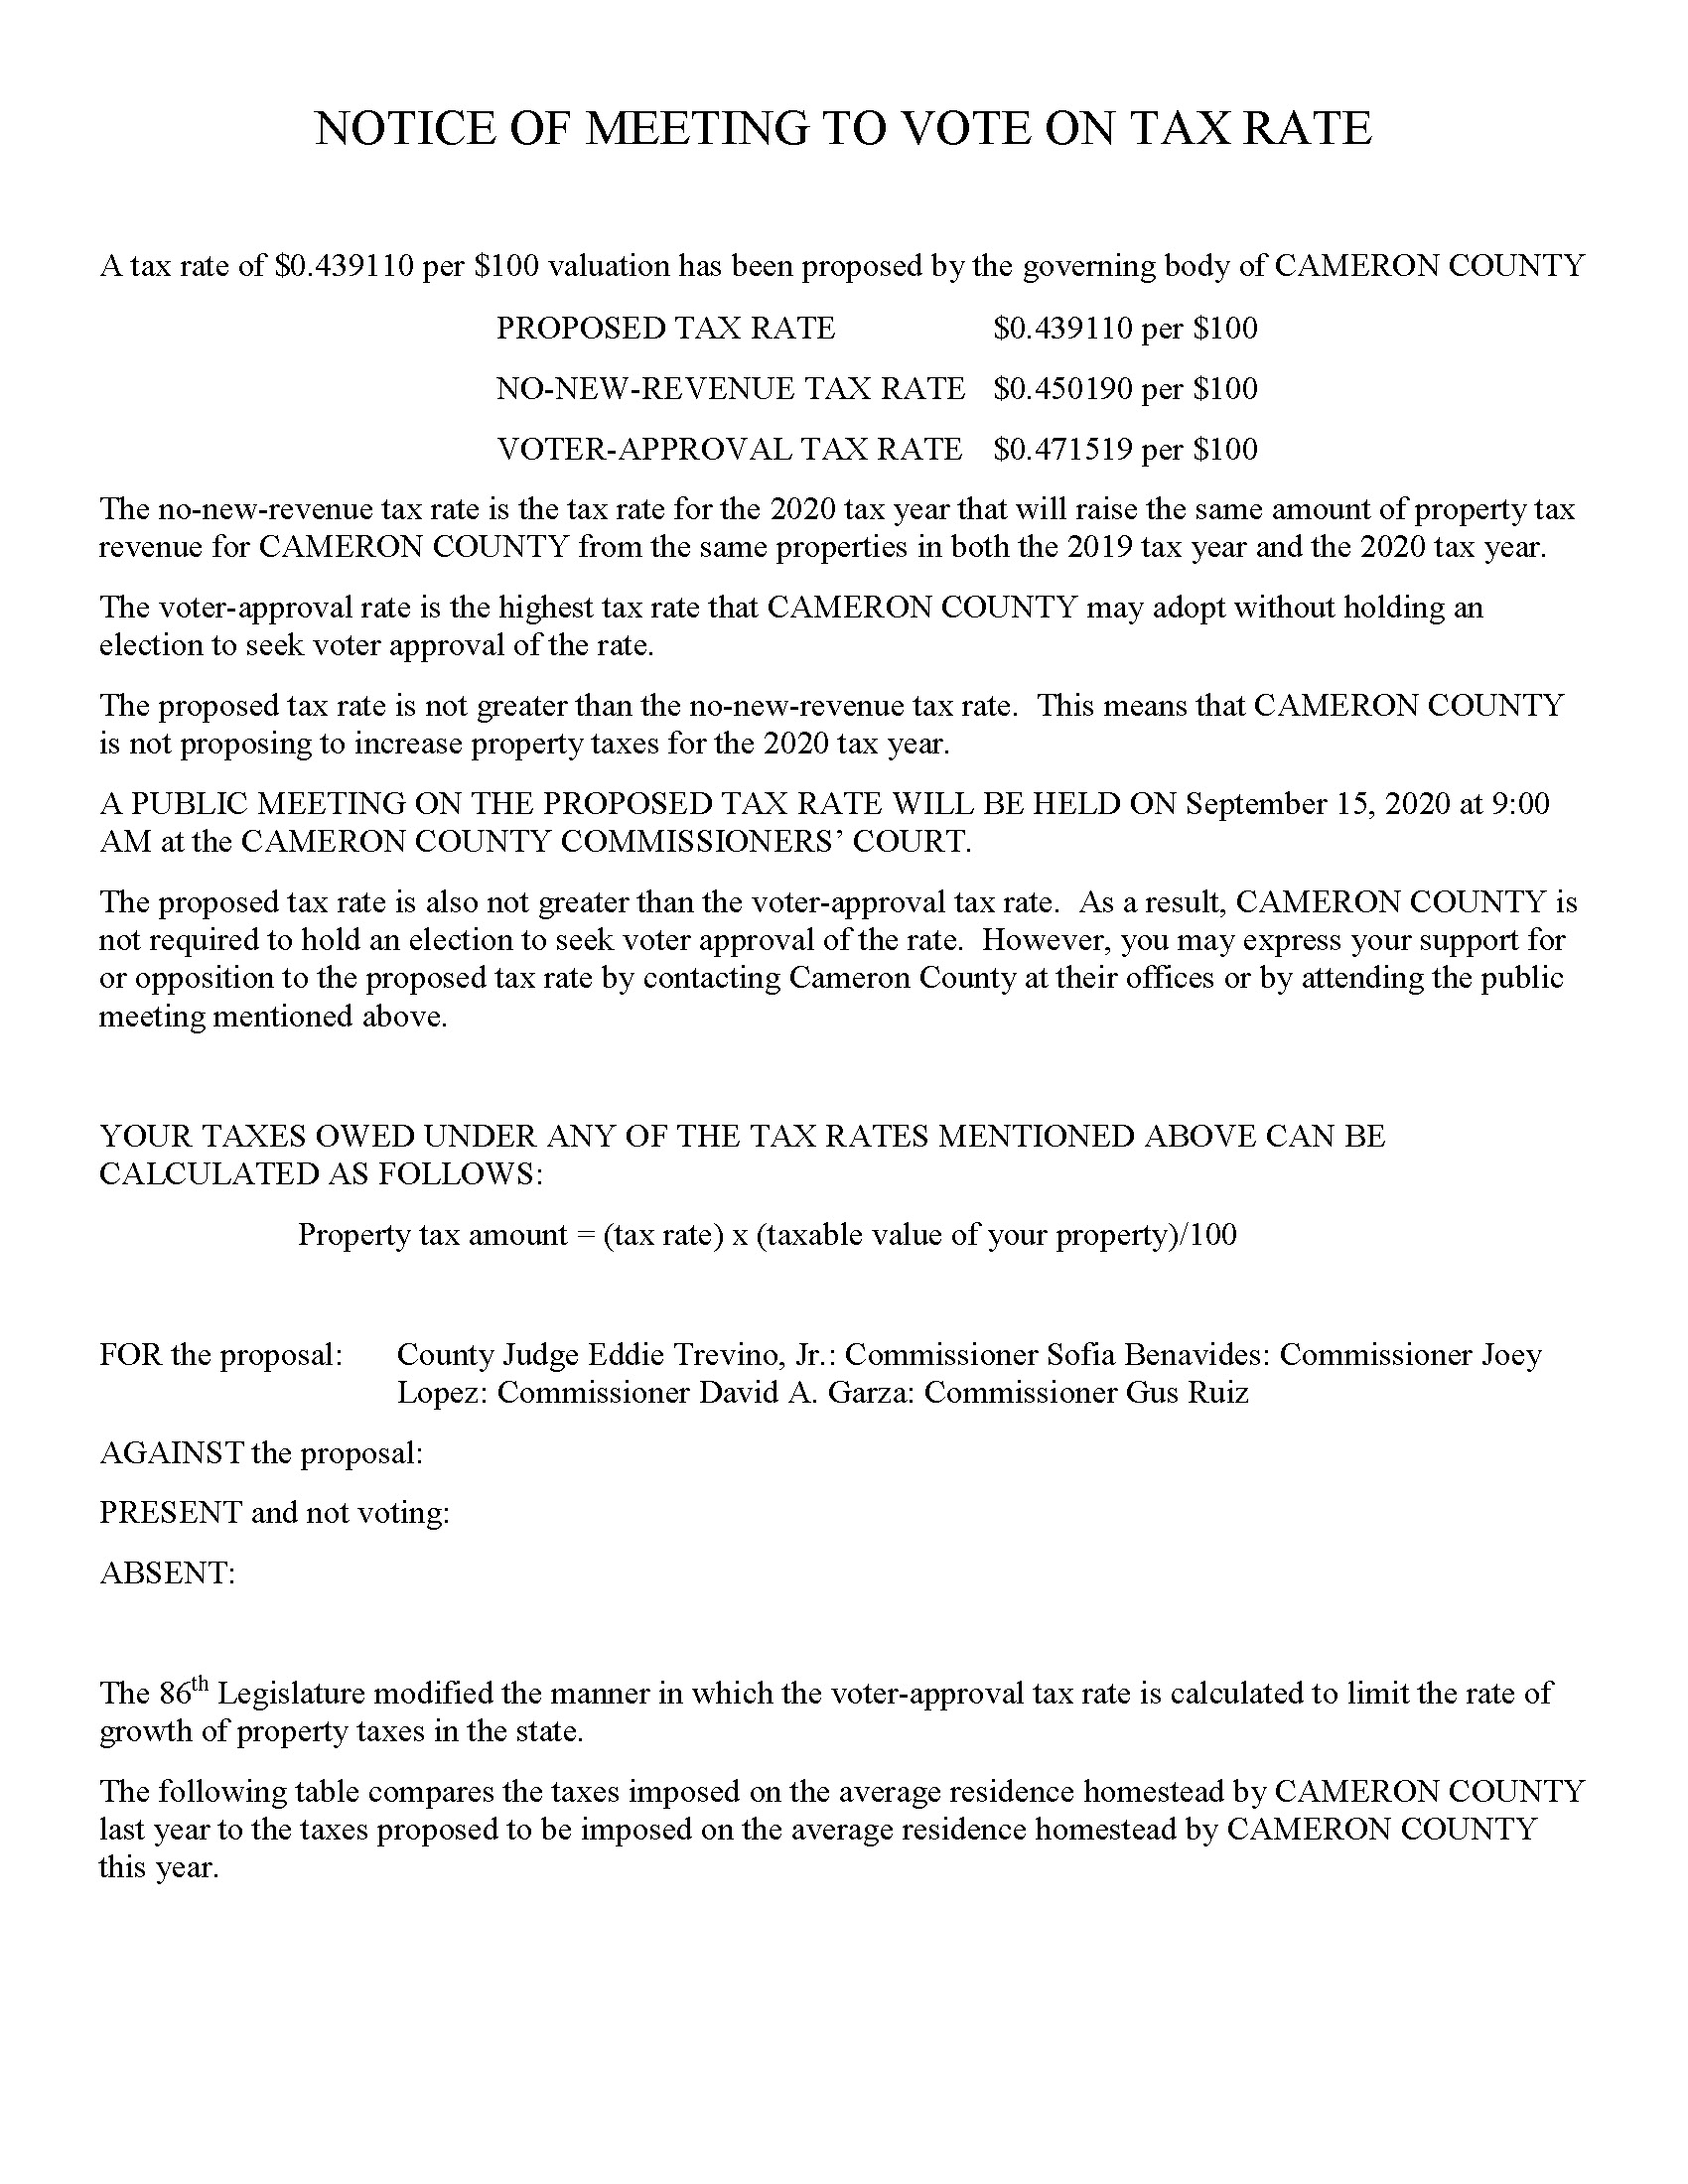 NOTICE OF MEETING TO VOTE ON TAX RATE Page 1